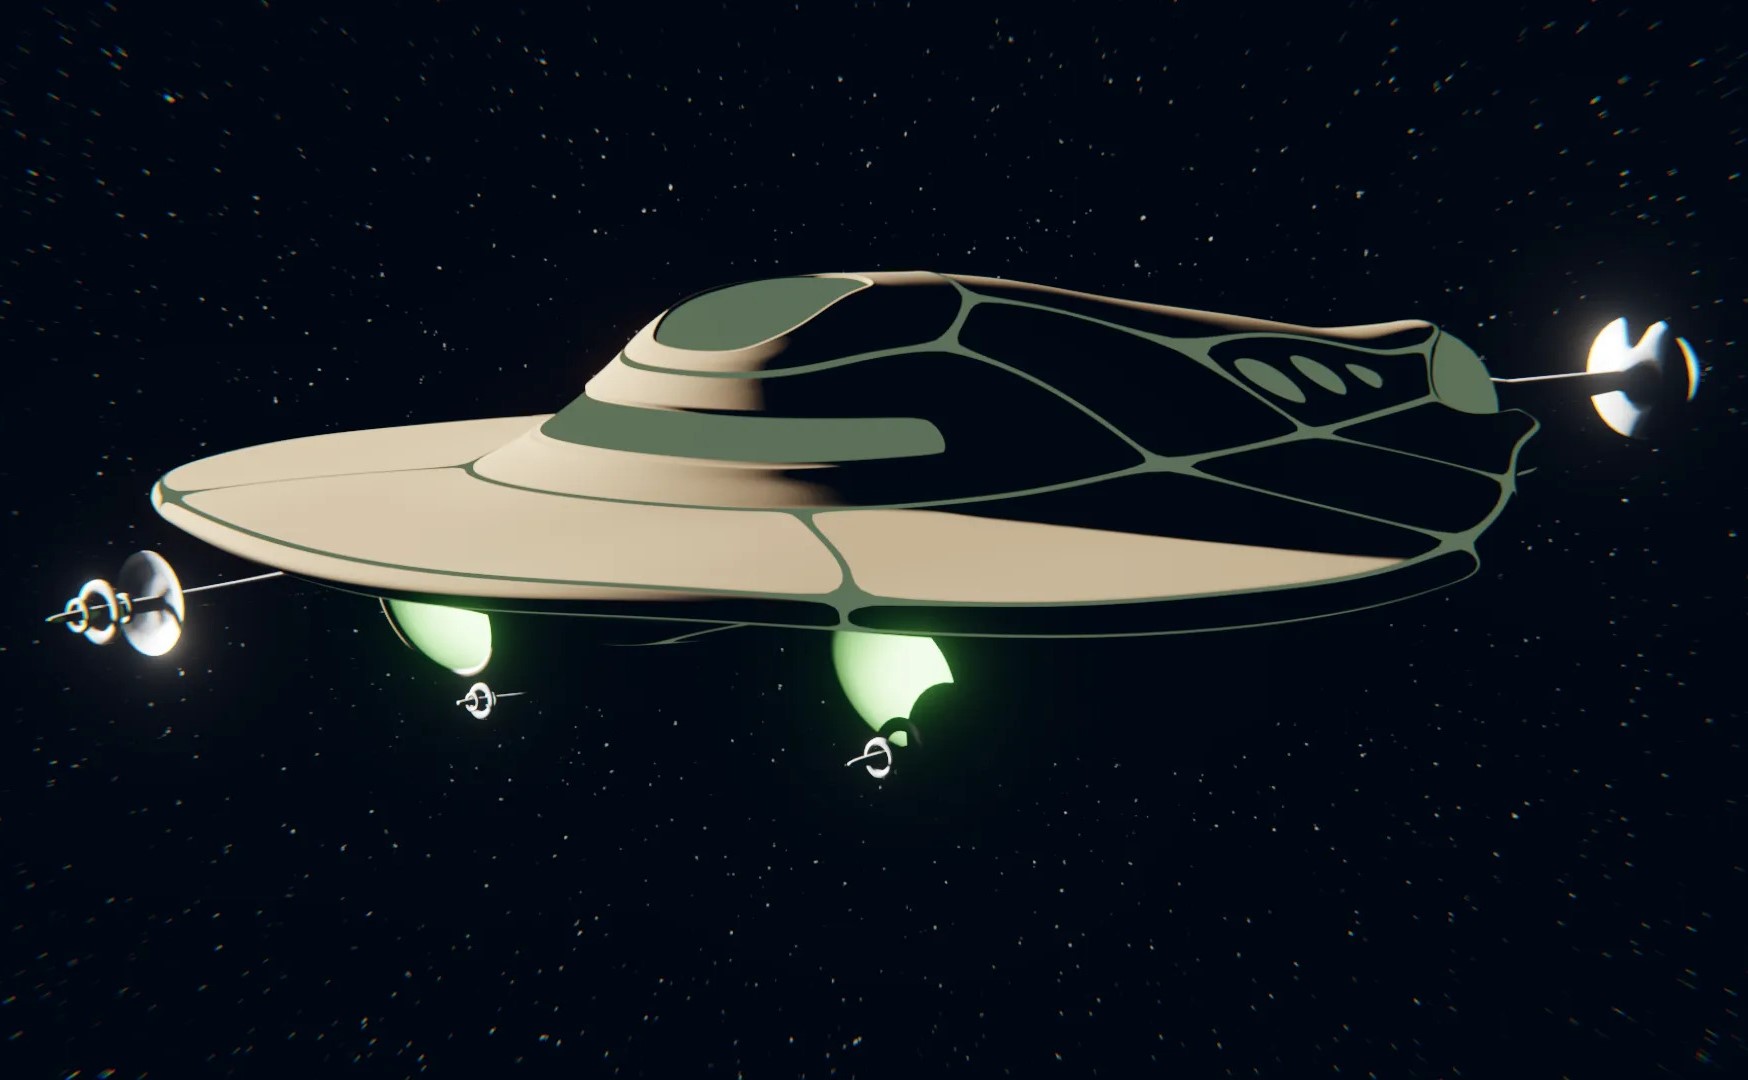 a 3D render of a stingray-inspired spaceship